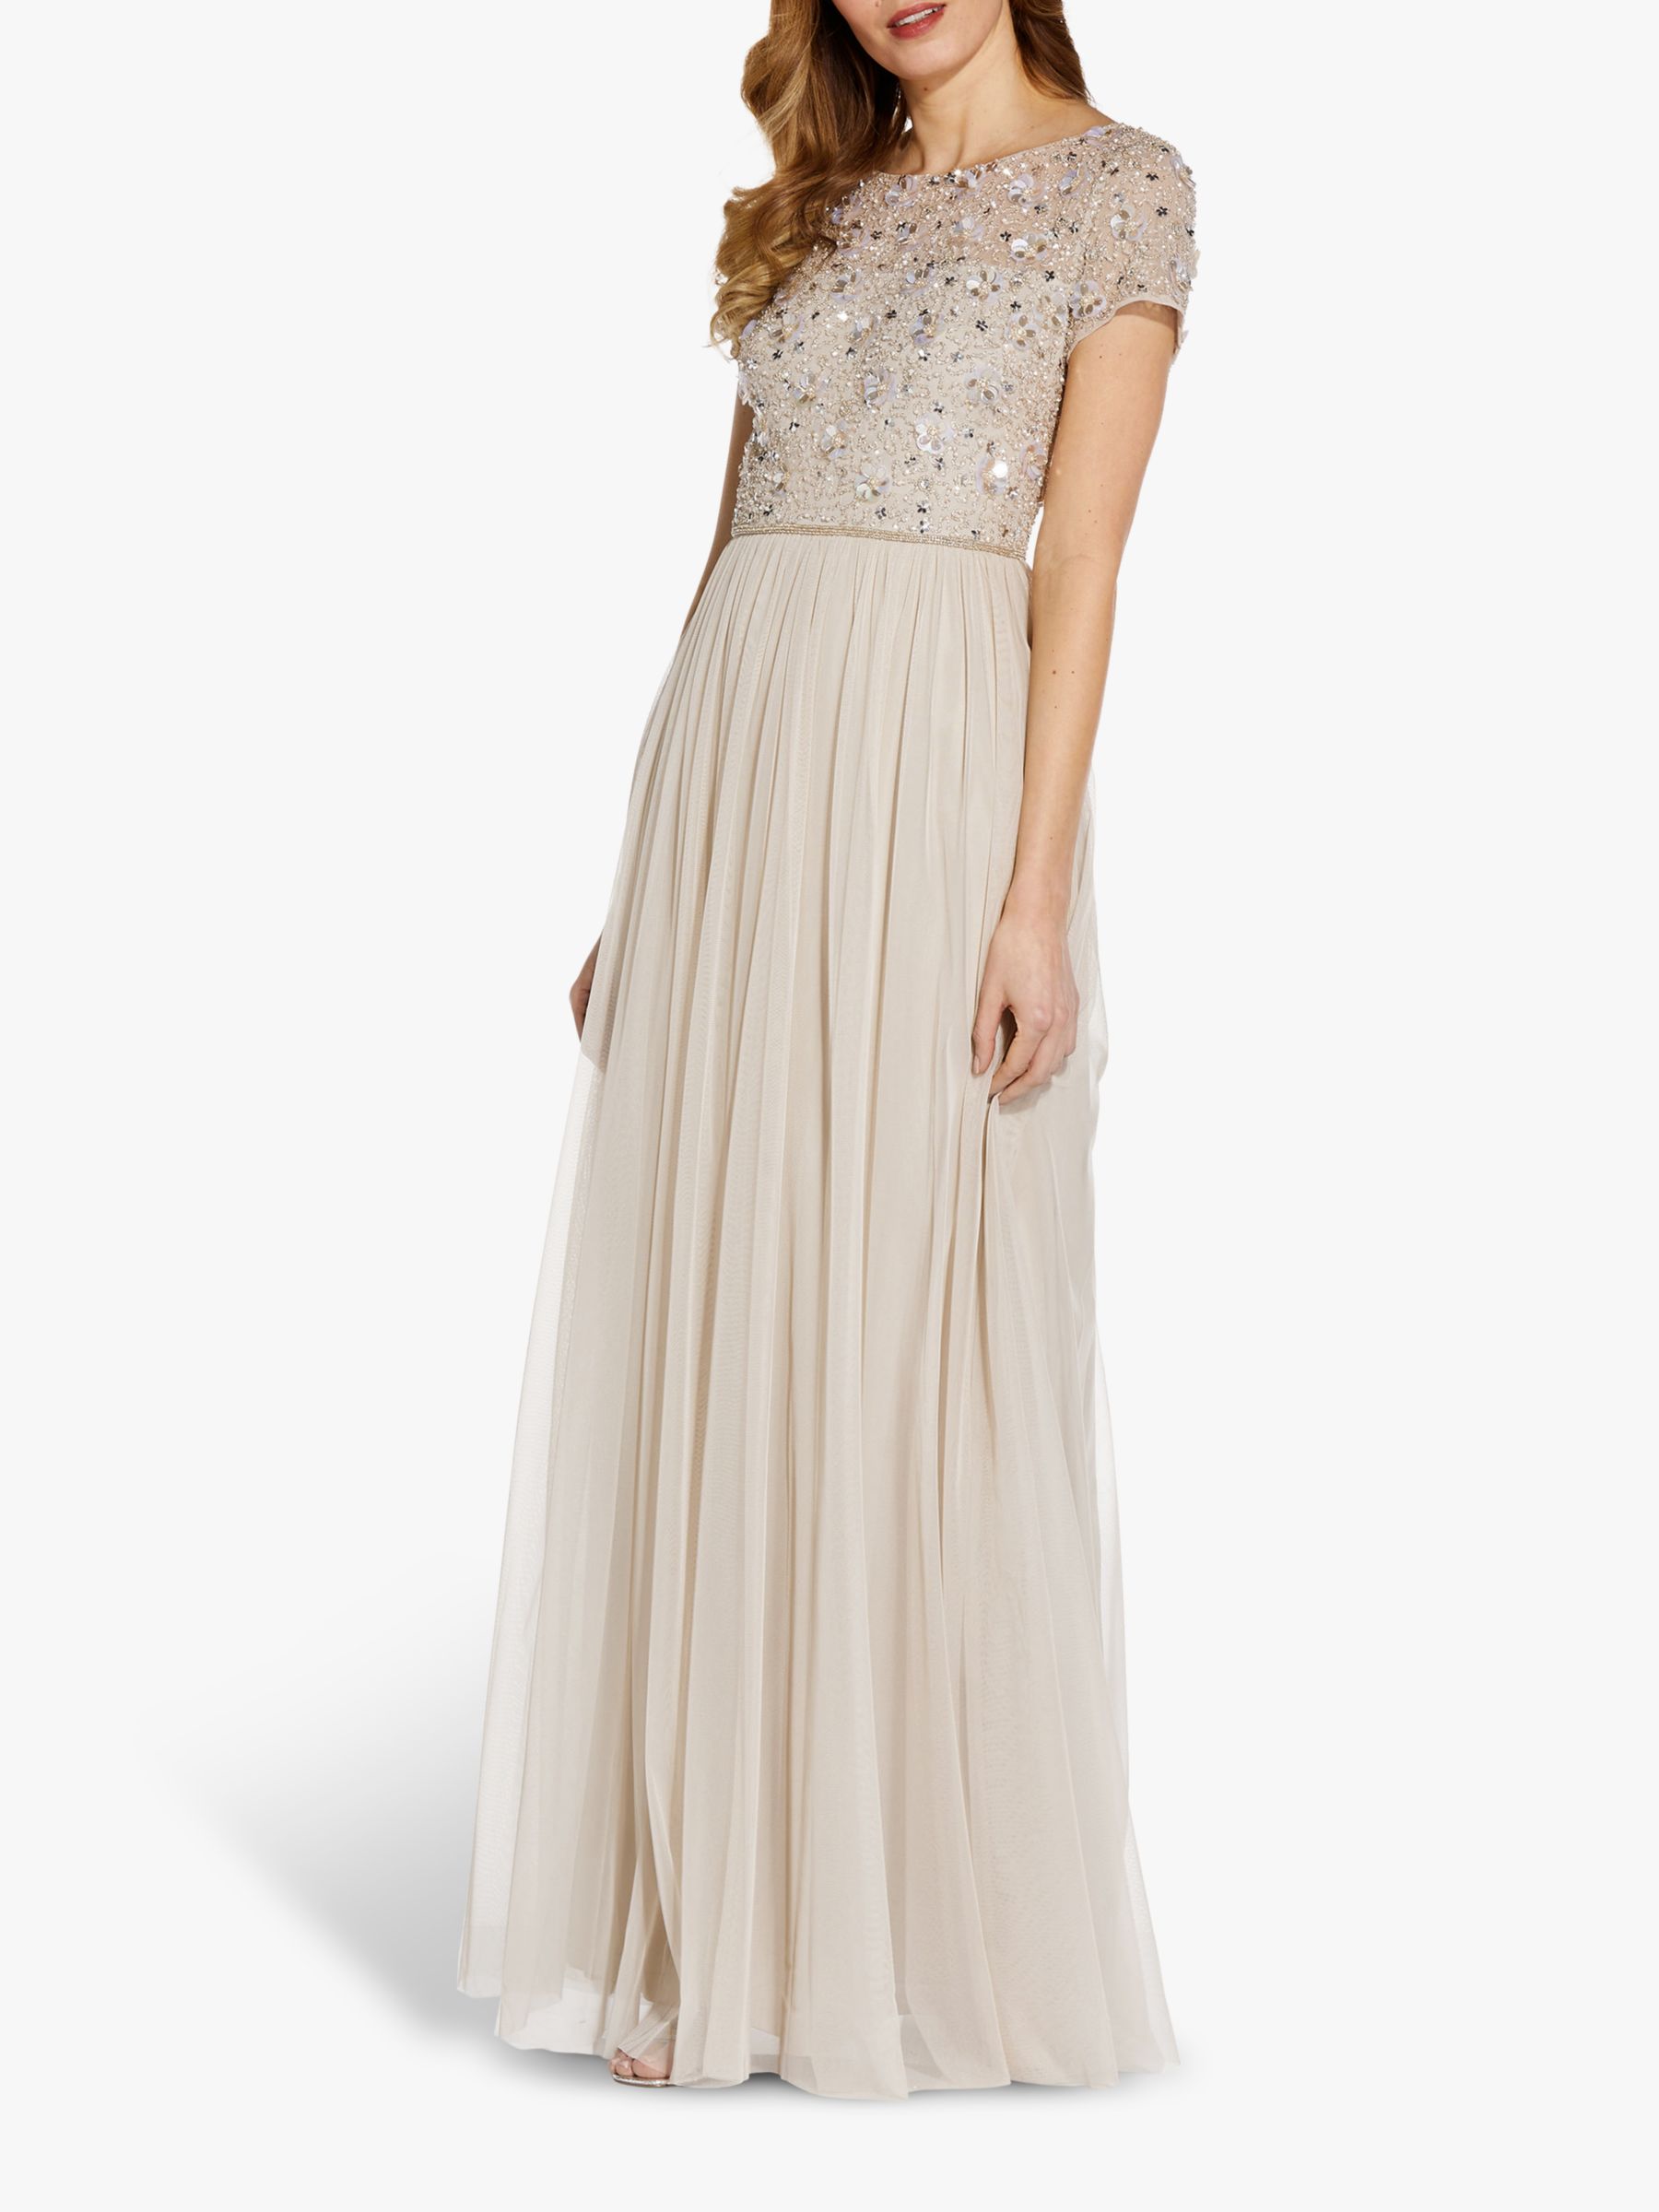 Adrianna Papell Floral Tulle Dress, Biscotti at John Lewis & Partners